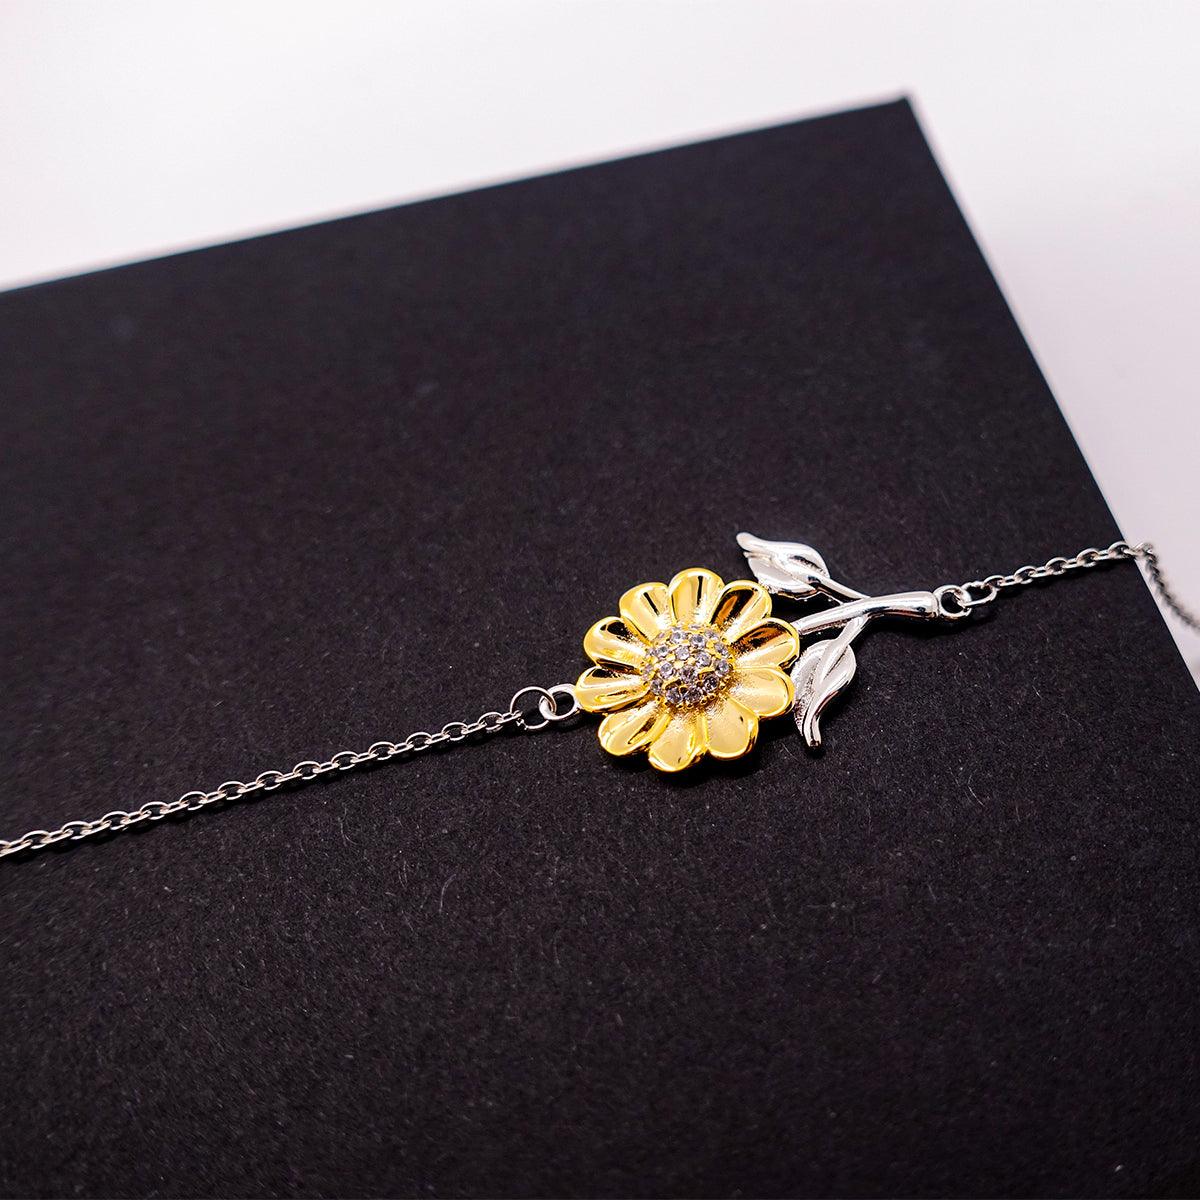 Interior Designer Sunflower Bracelet - Thanks for being who you are - Birthday Christmas Jewelry Gifts Coworkers Colleague Boss - Mallard Moon Gift Shop